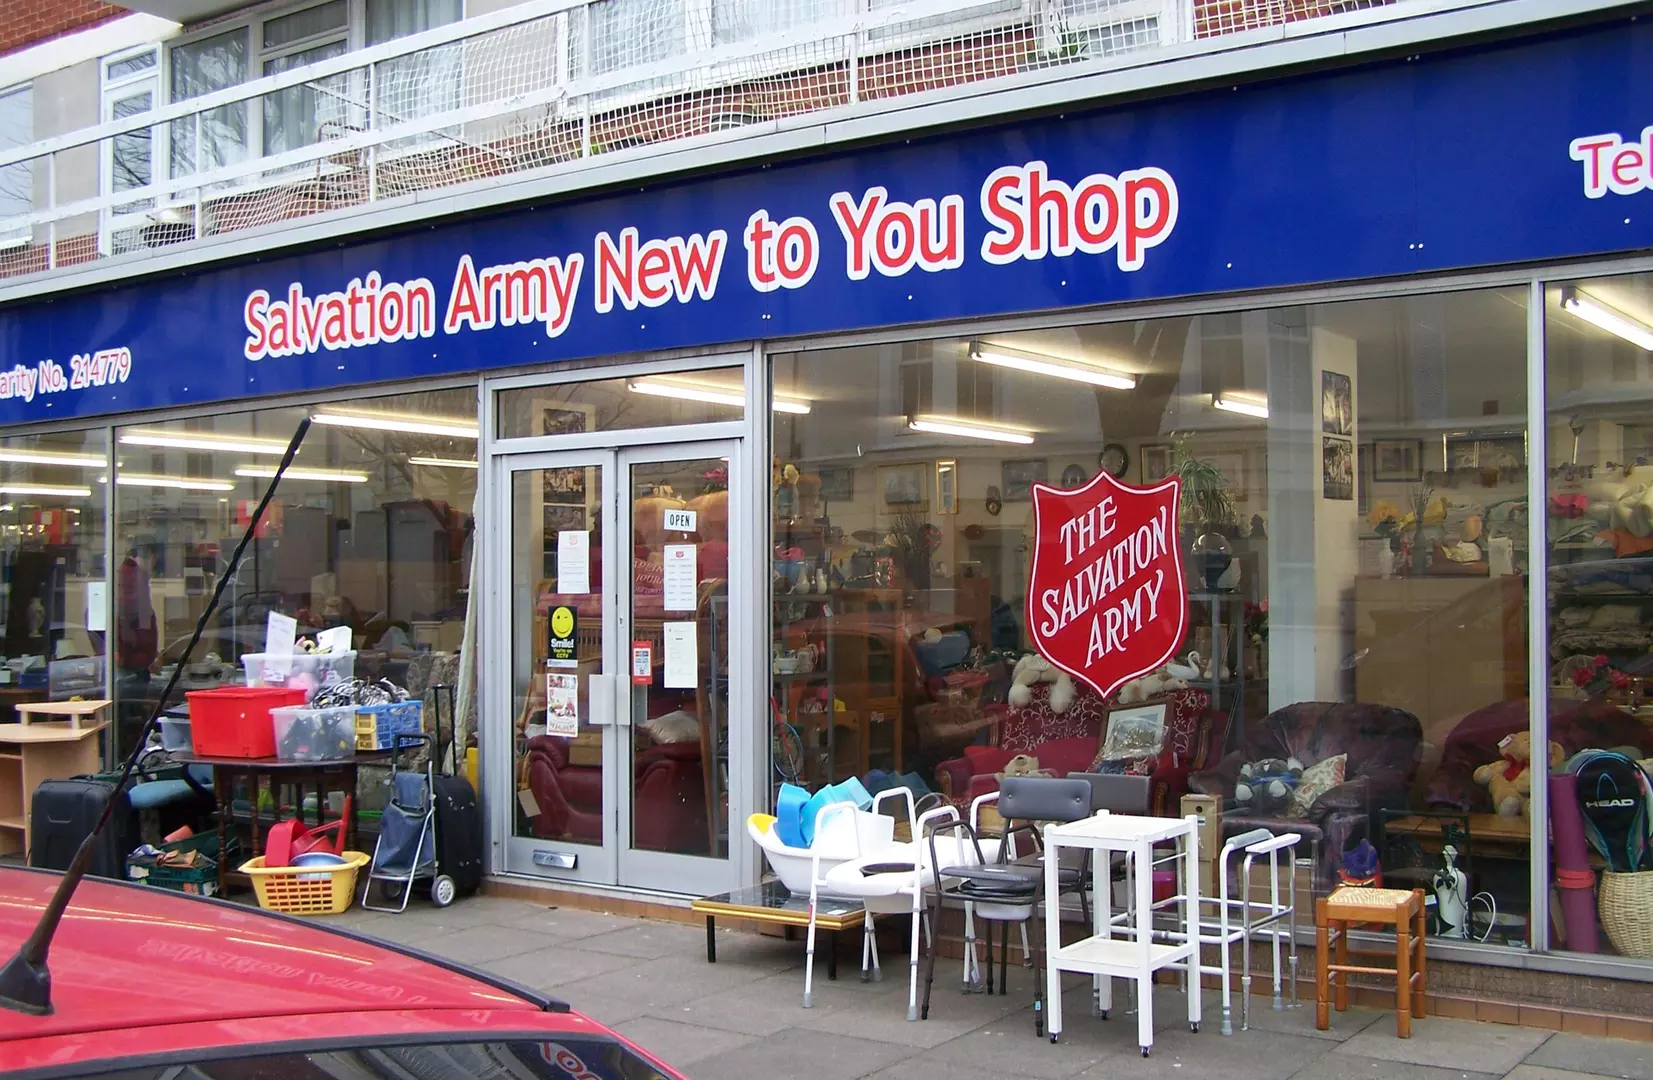 Eastbourne New to You shop